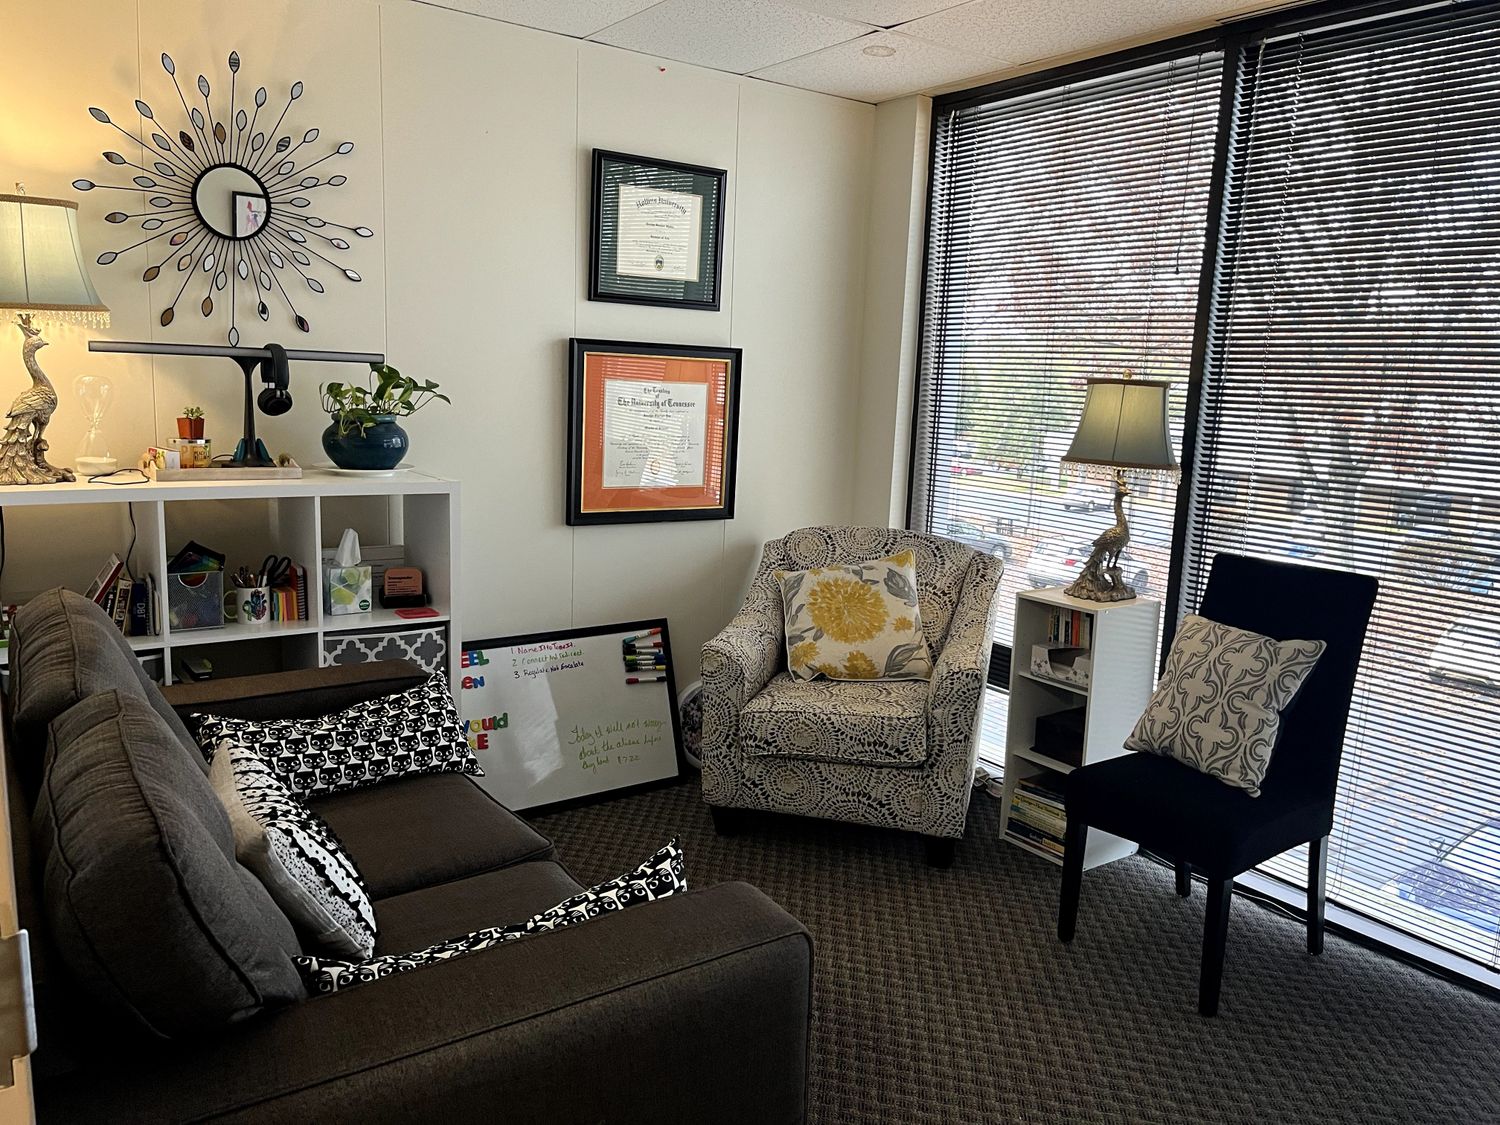 Gallery Photo of The Next Step Behavioral Health recently moved. Welcome to our new space!